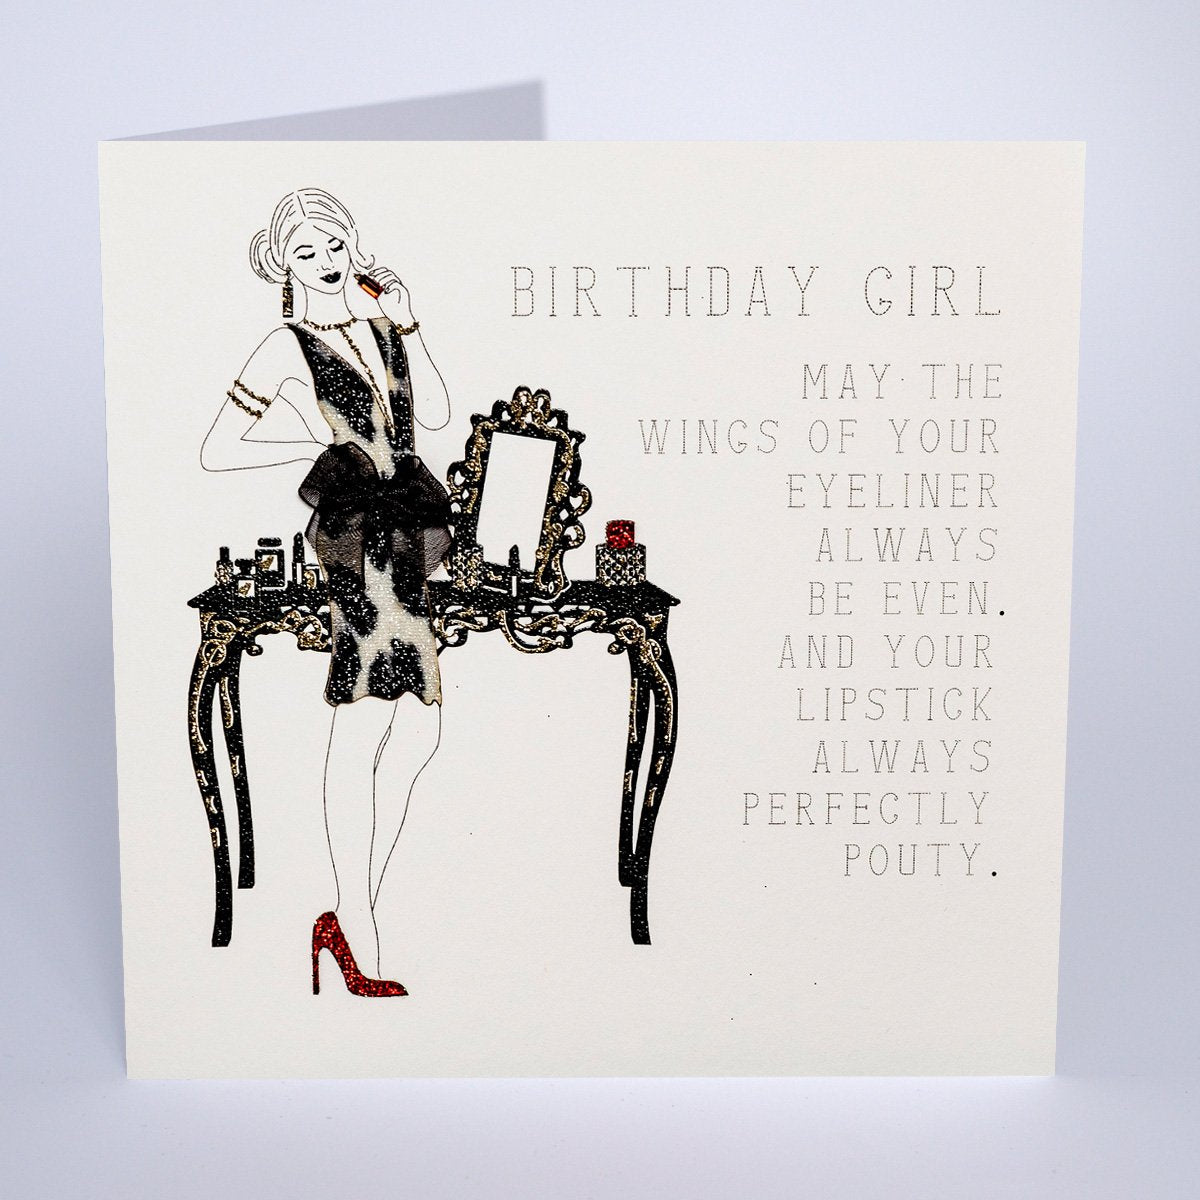 Five Dollar Shake Wings of Your Eyeliner Birthday Card